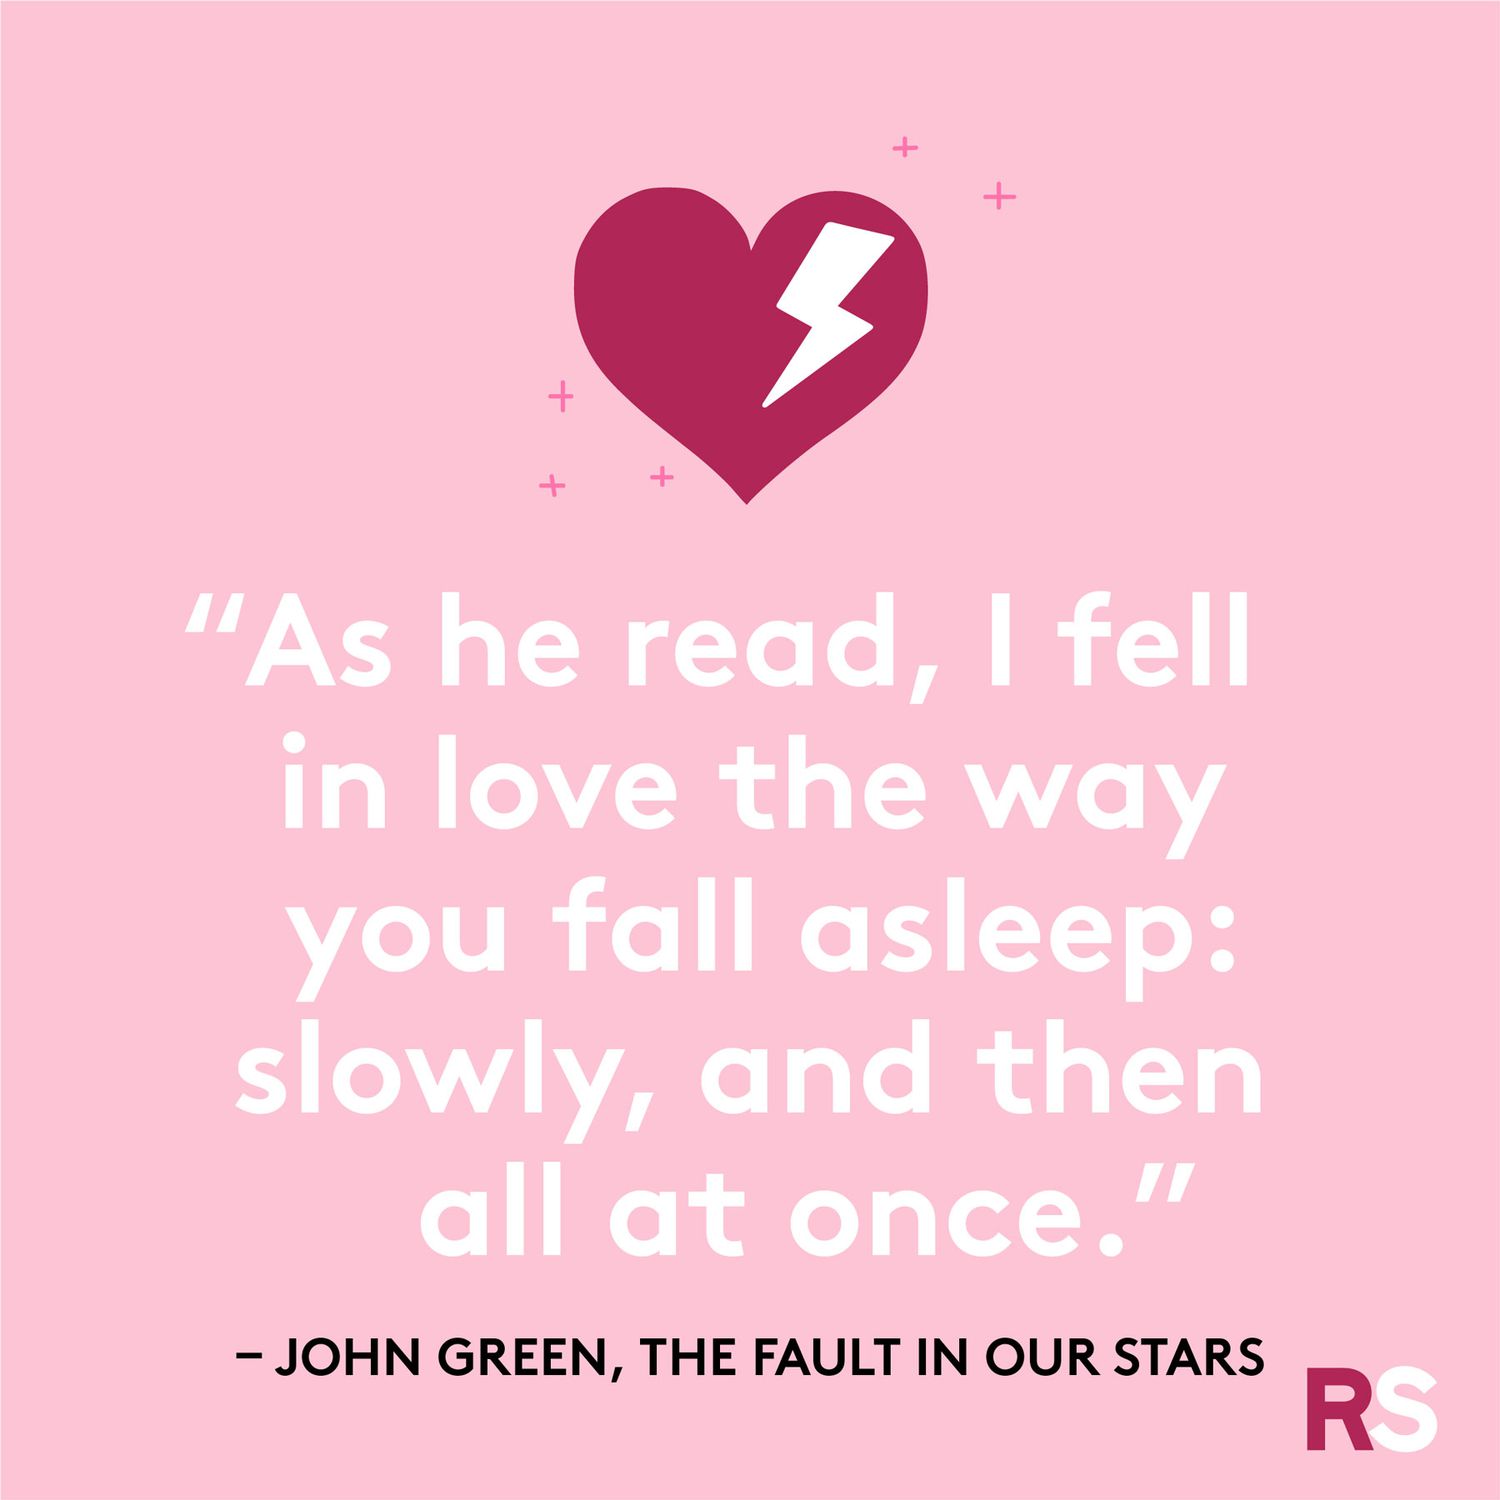 Love quotes, quotes about love - John Green, The Fault in Our Stars